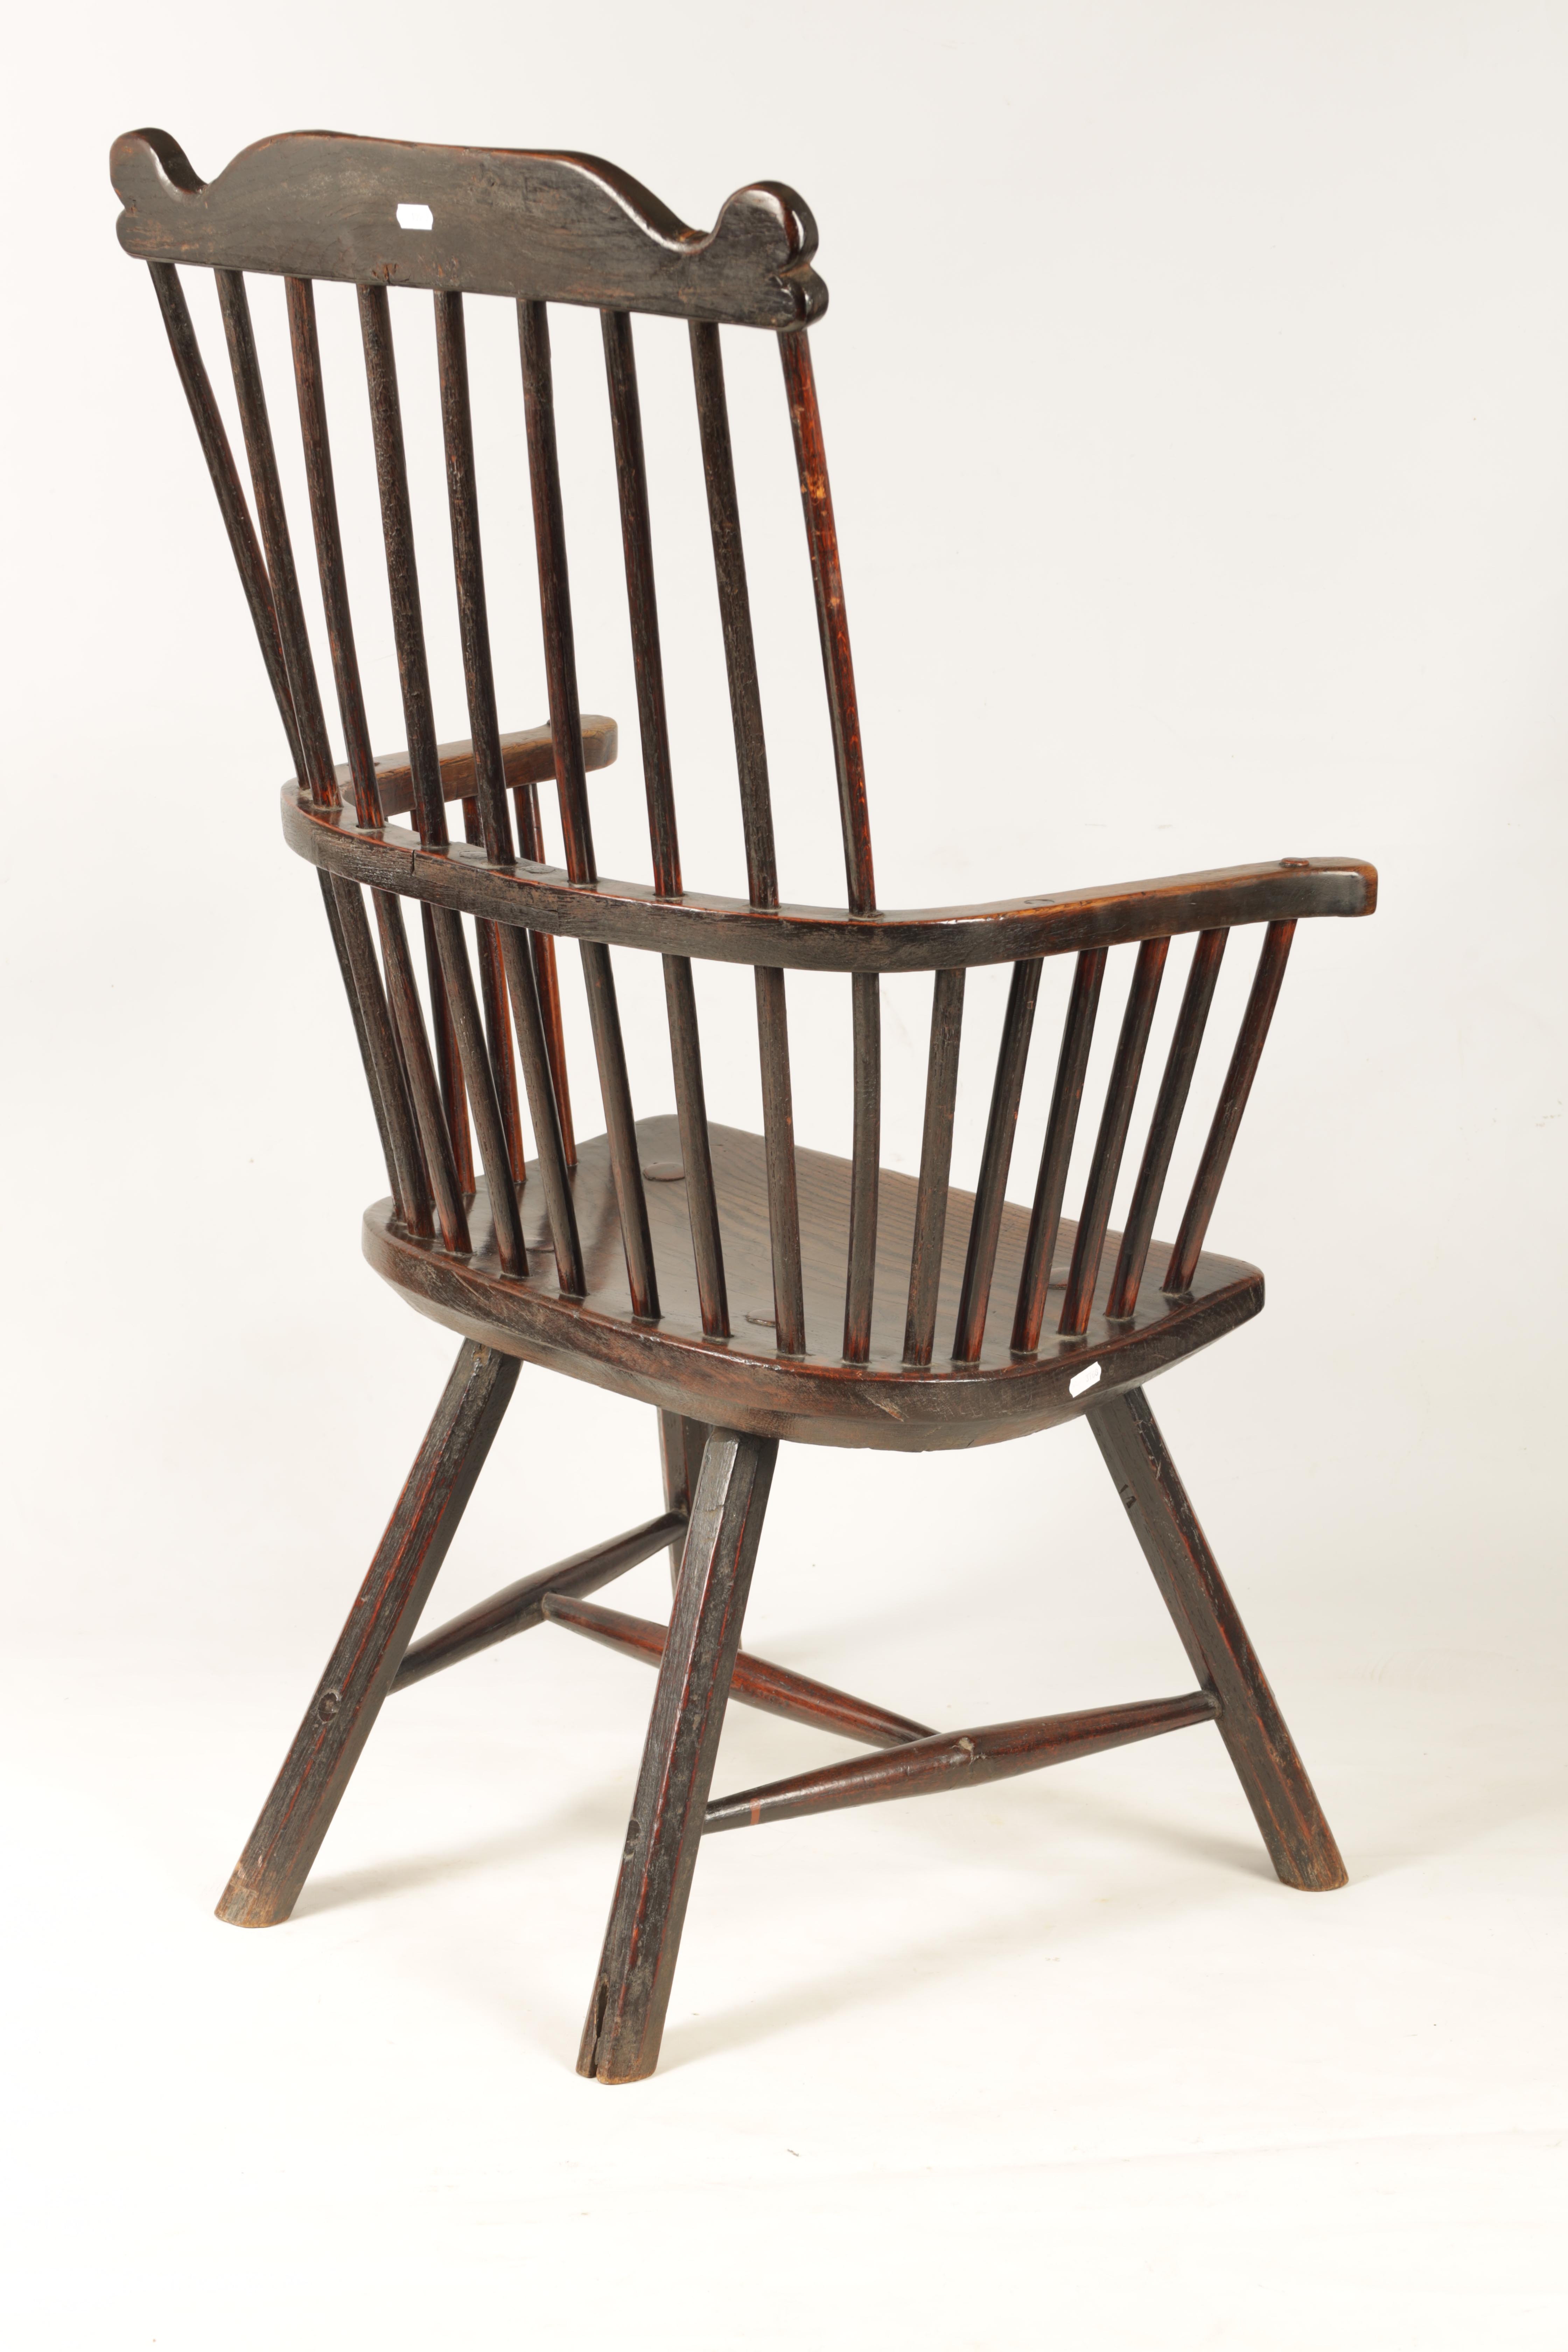 A GOOD 18TH CENTURY THAMES VALLEY OAK AND ELM WINDSOR CHAIR with shaped top rail and flared arms, - Image 7 of 11